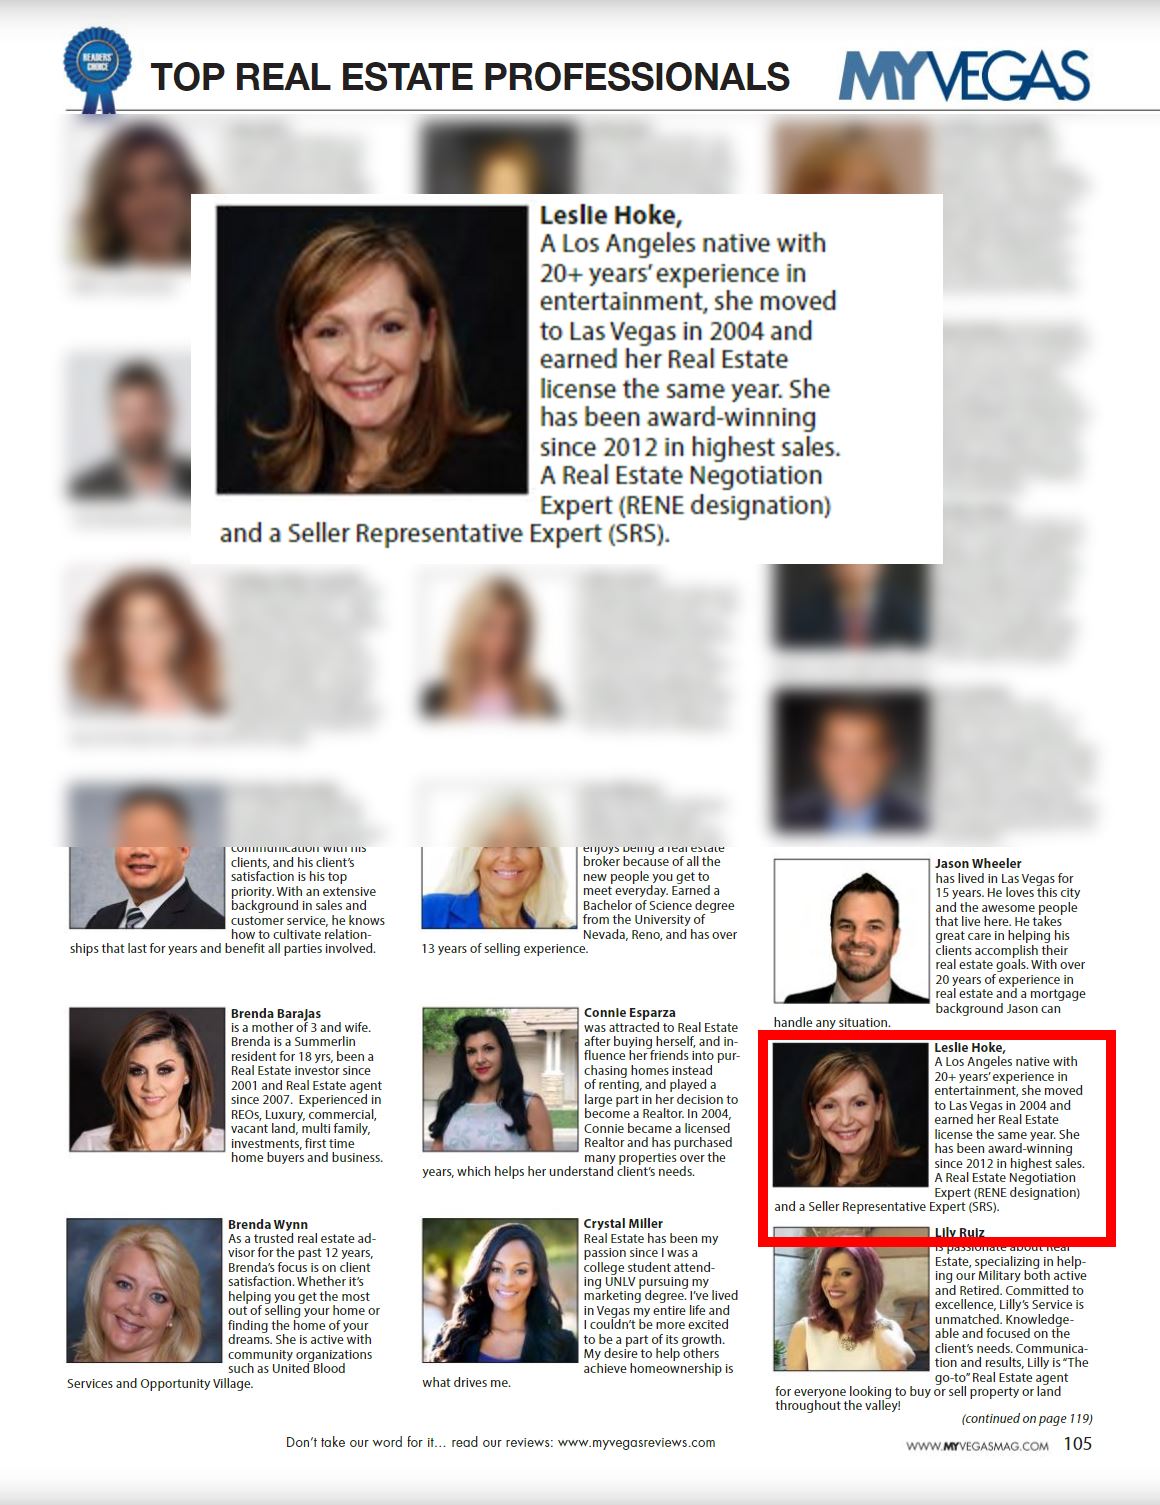 Leslie Hoke Voted among top real estate professionals by MYVEGAS Magazine